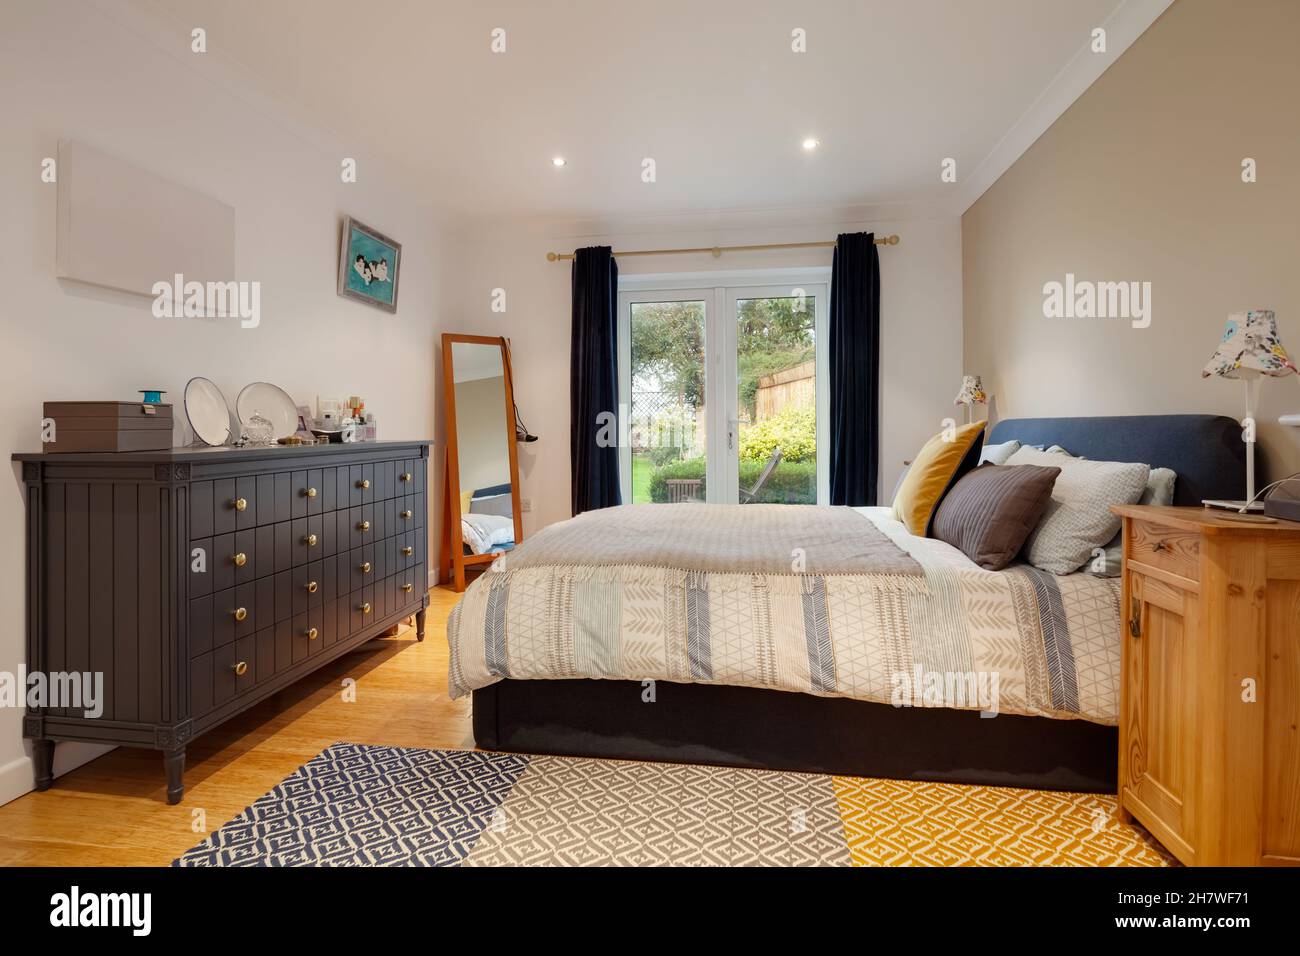 Cambridge, Cambridgeshire - October 1 2019: Luxury furnished bedroom  decorated in a modern manner with statement furniture and bed Stock Photo -  Alamy